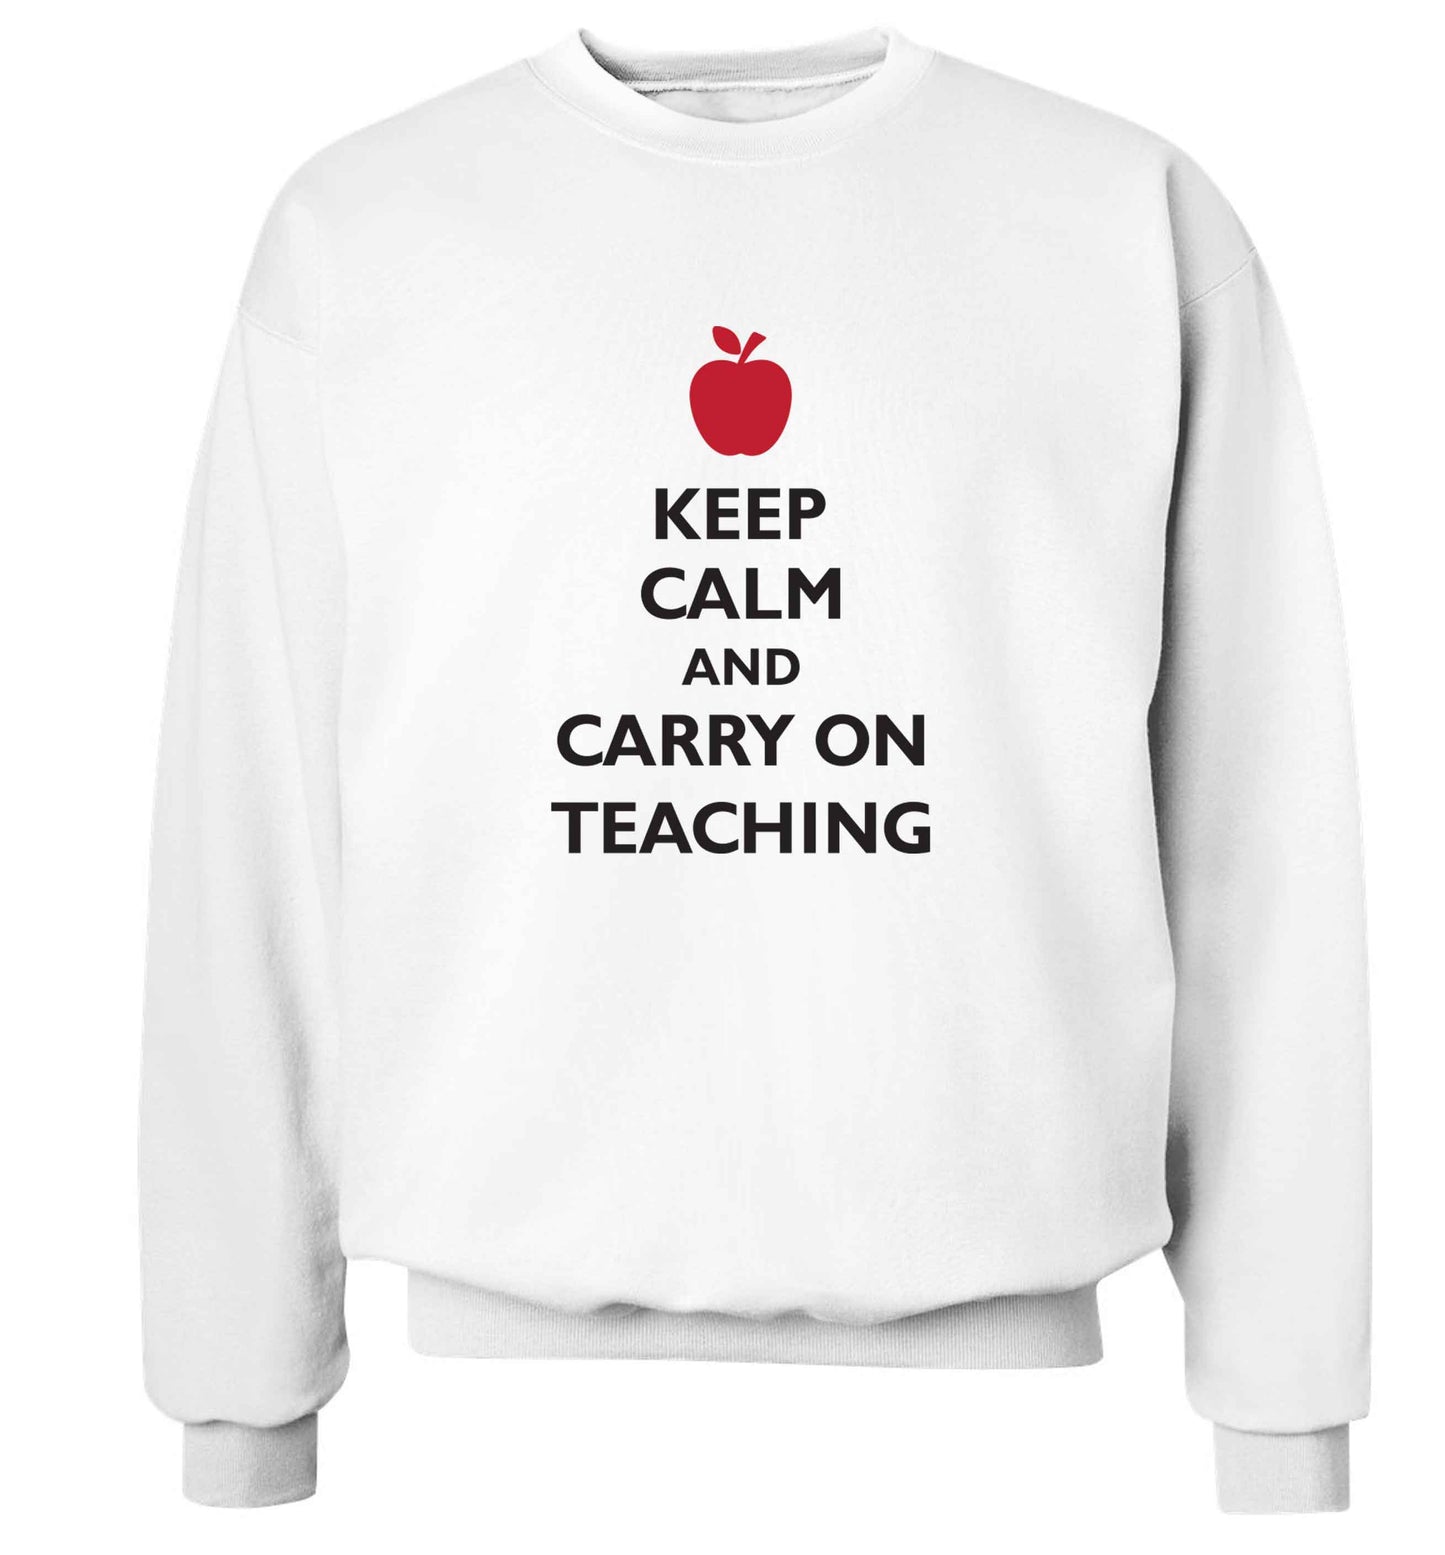 Keep calm and carry on teaching adult's unisex white sweater 2XL